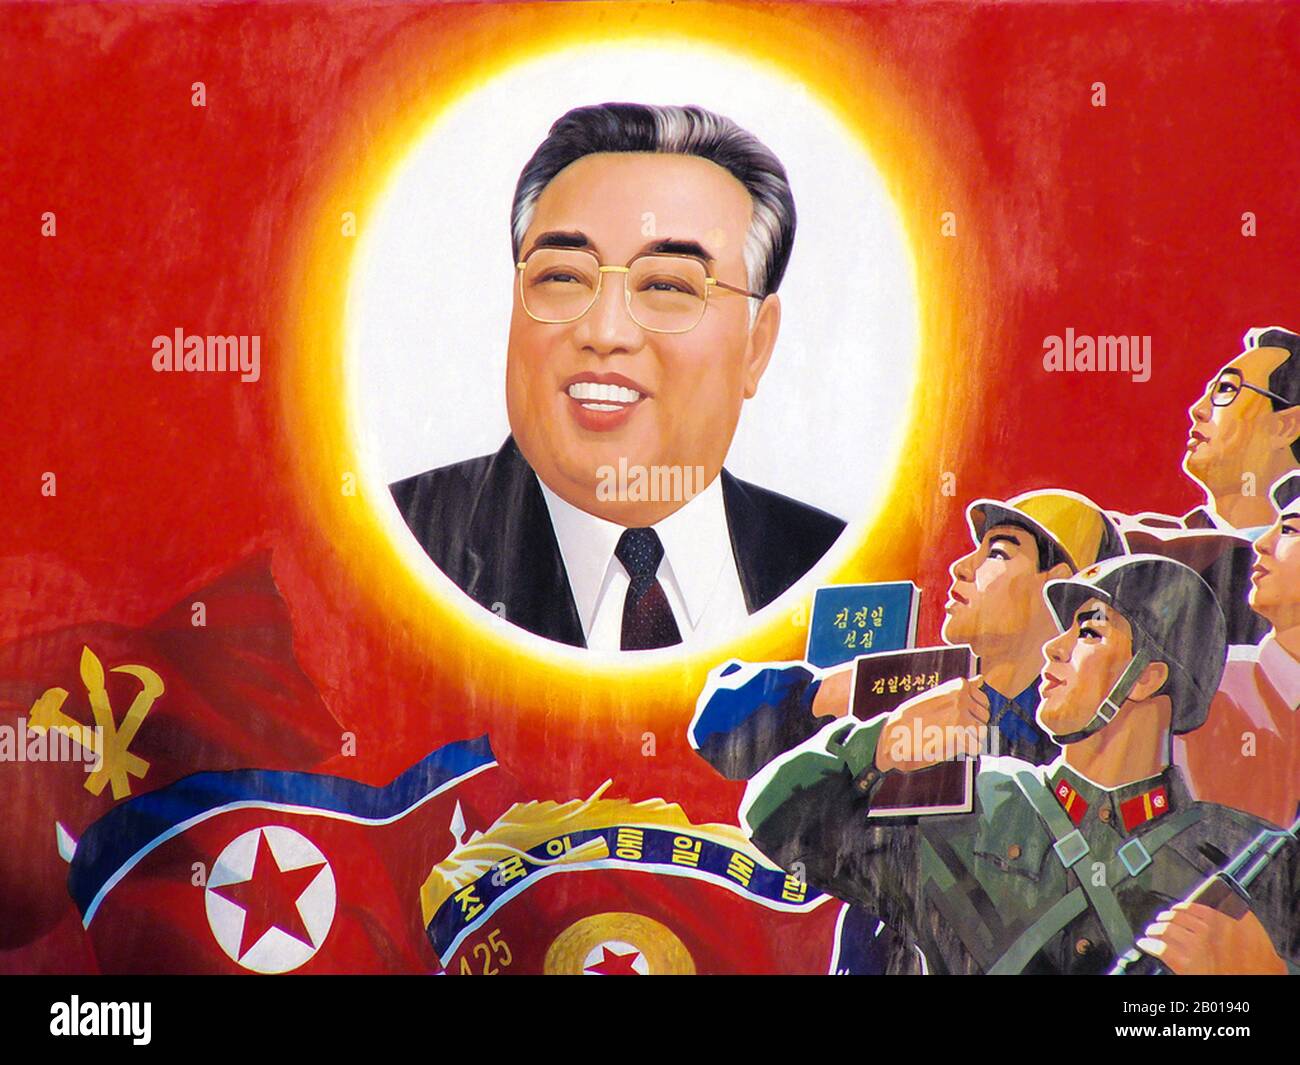 Korea: North Korean (DPRK) propaganda poster glorifying Kim Il Sung and displaying popular and military loyalty. Photo by yeowatzup (CC BY 2.0 License).  Socialist Realism is a style of realistic art which developed under Socialism in the Soviet Union and became a dominant style in other communist countries. Socialist Realism is a teleologically-oriented style having as its purpose the furtherance of the goals of socialism and communism. Although related, it should not be confused with Social Realism, a type of art that realistically depicts subjects of social concern. Stock Photo